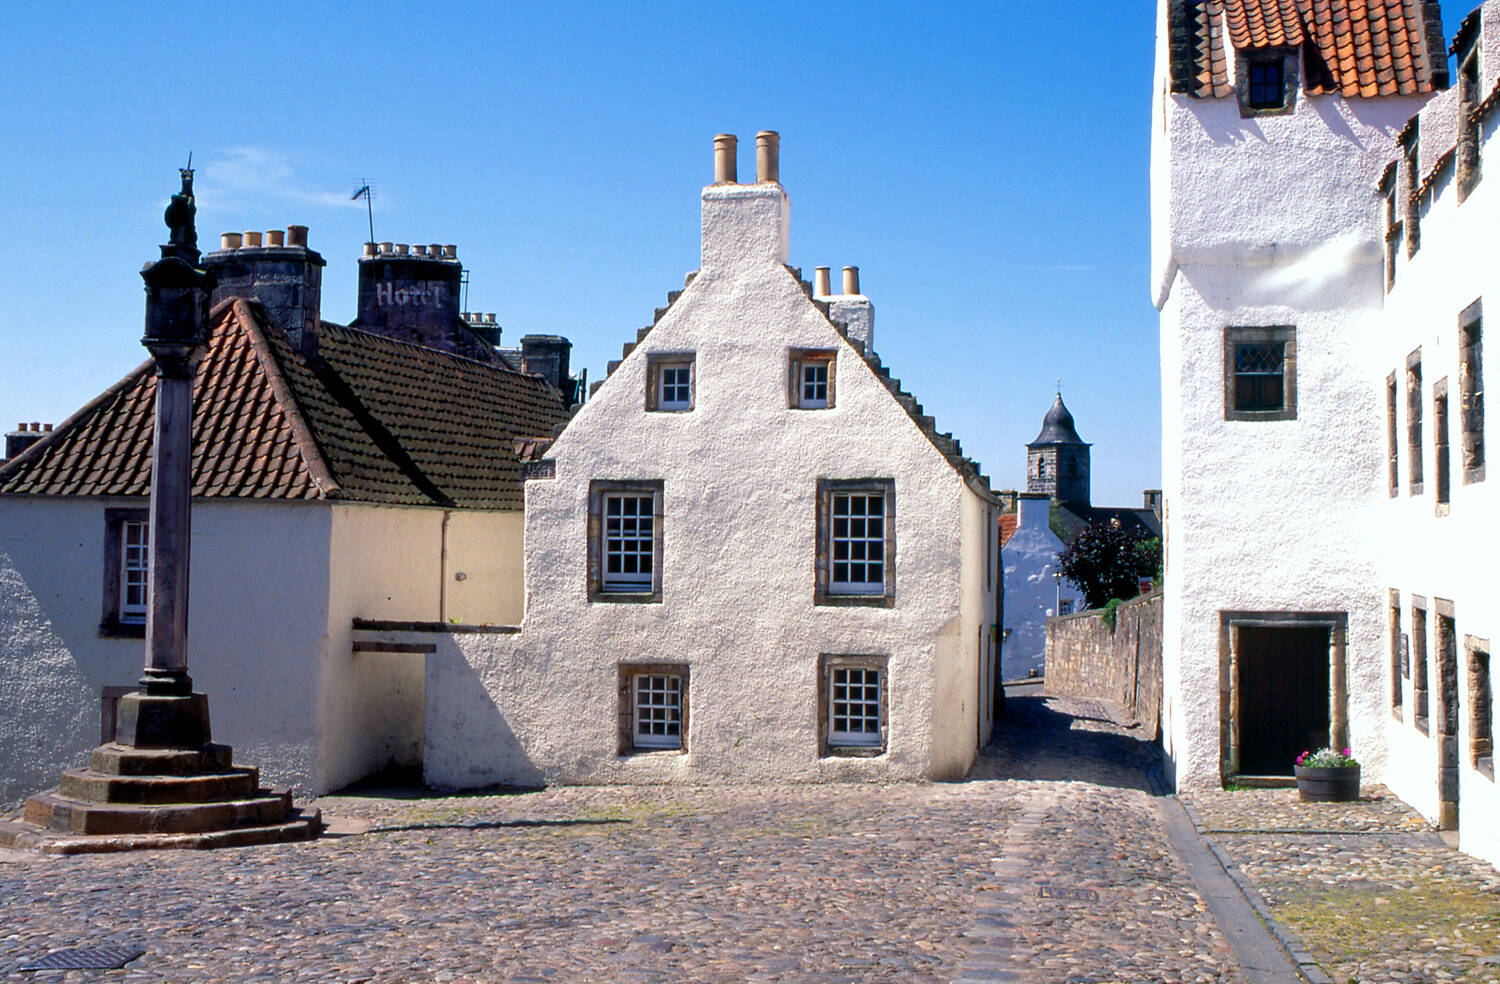 The mercat cross in the cobbled village square in Culross, surrounded by white 17th-century houses.